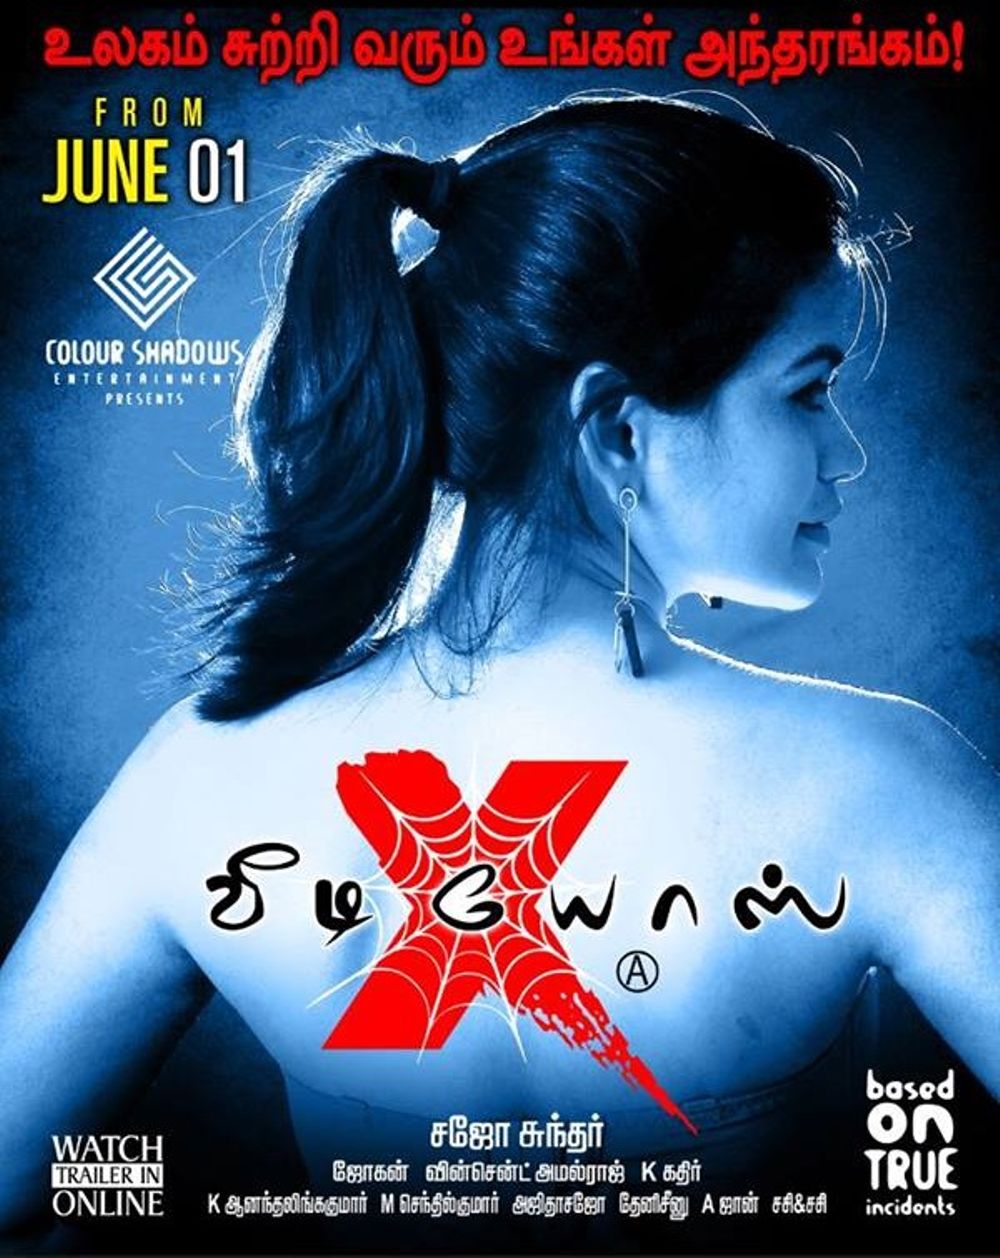 X Videos Movie Review (2018) - Rating, Cast & Crew With Synopsis